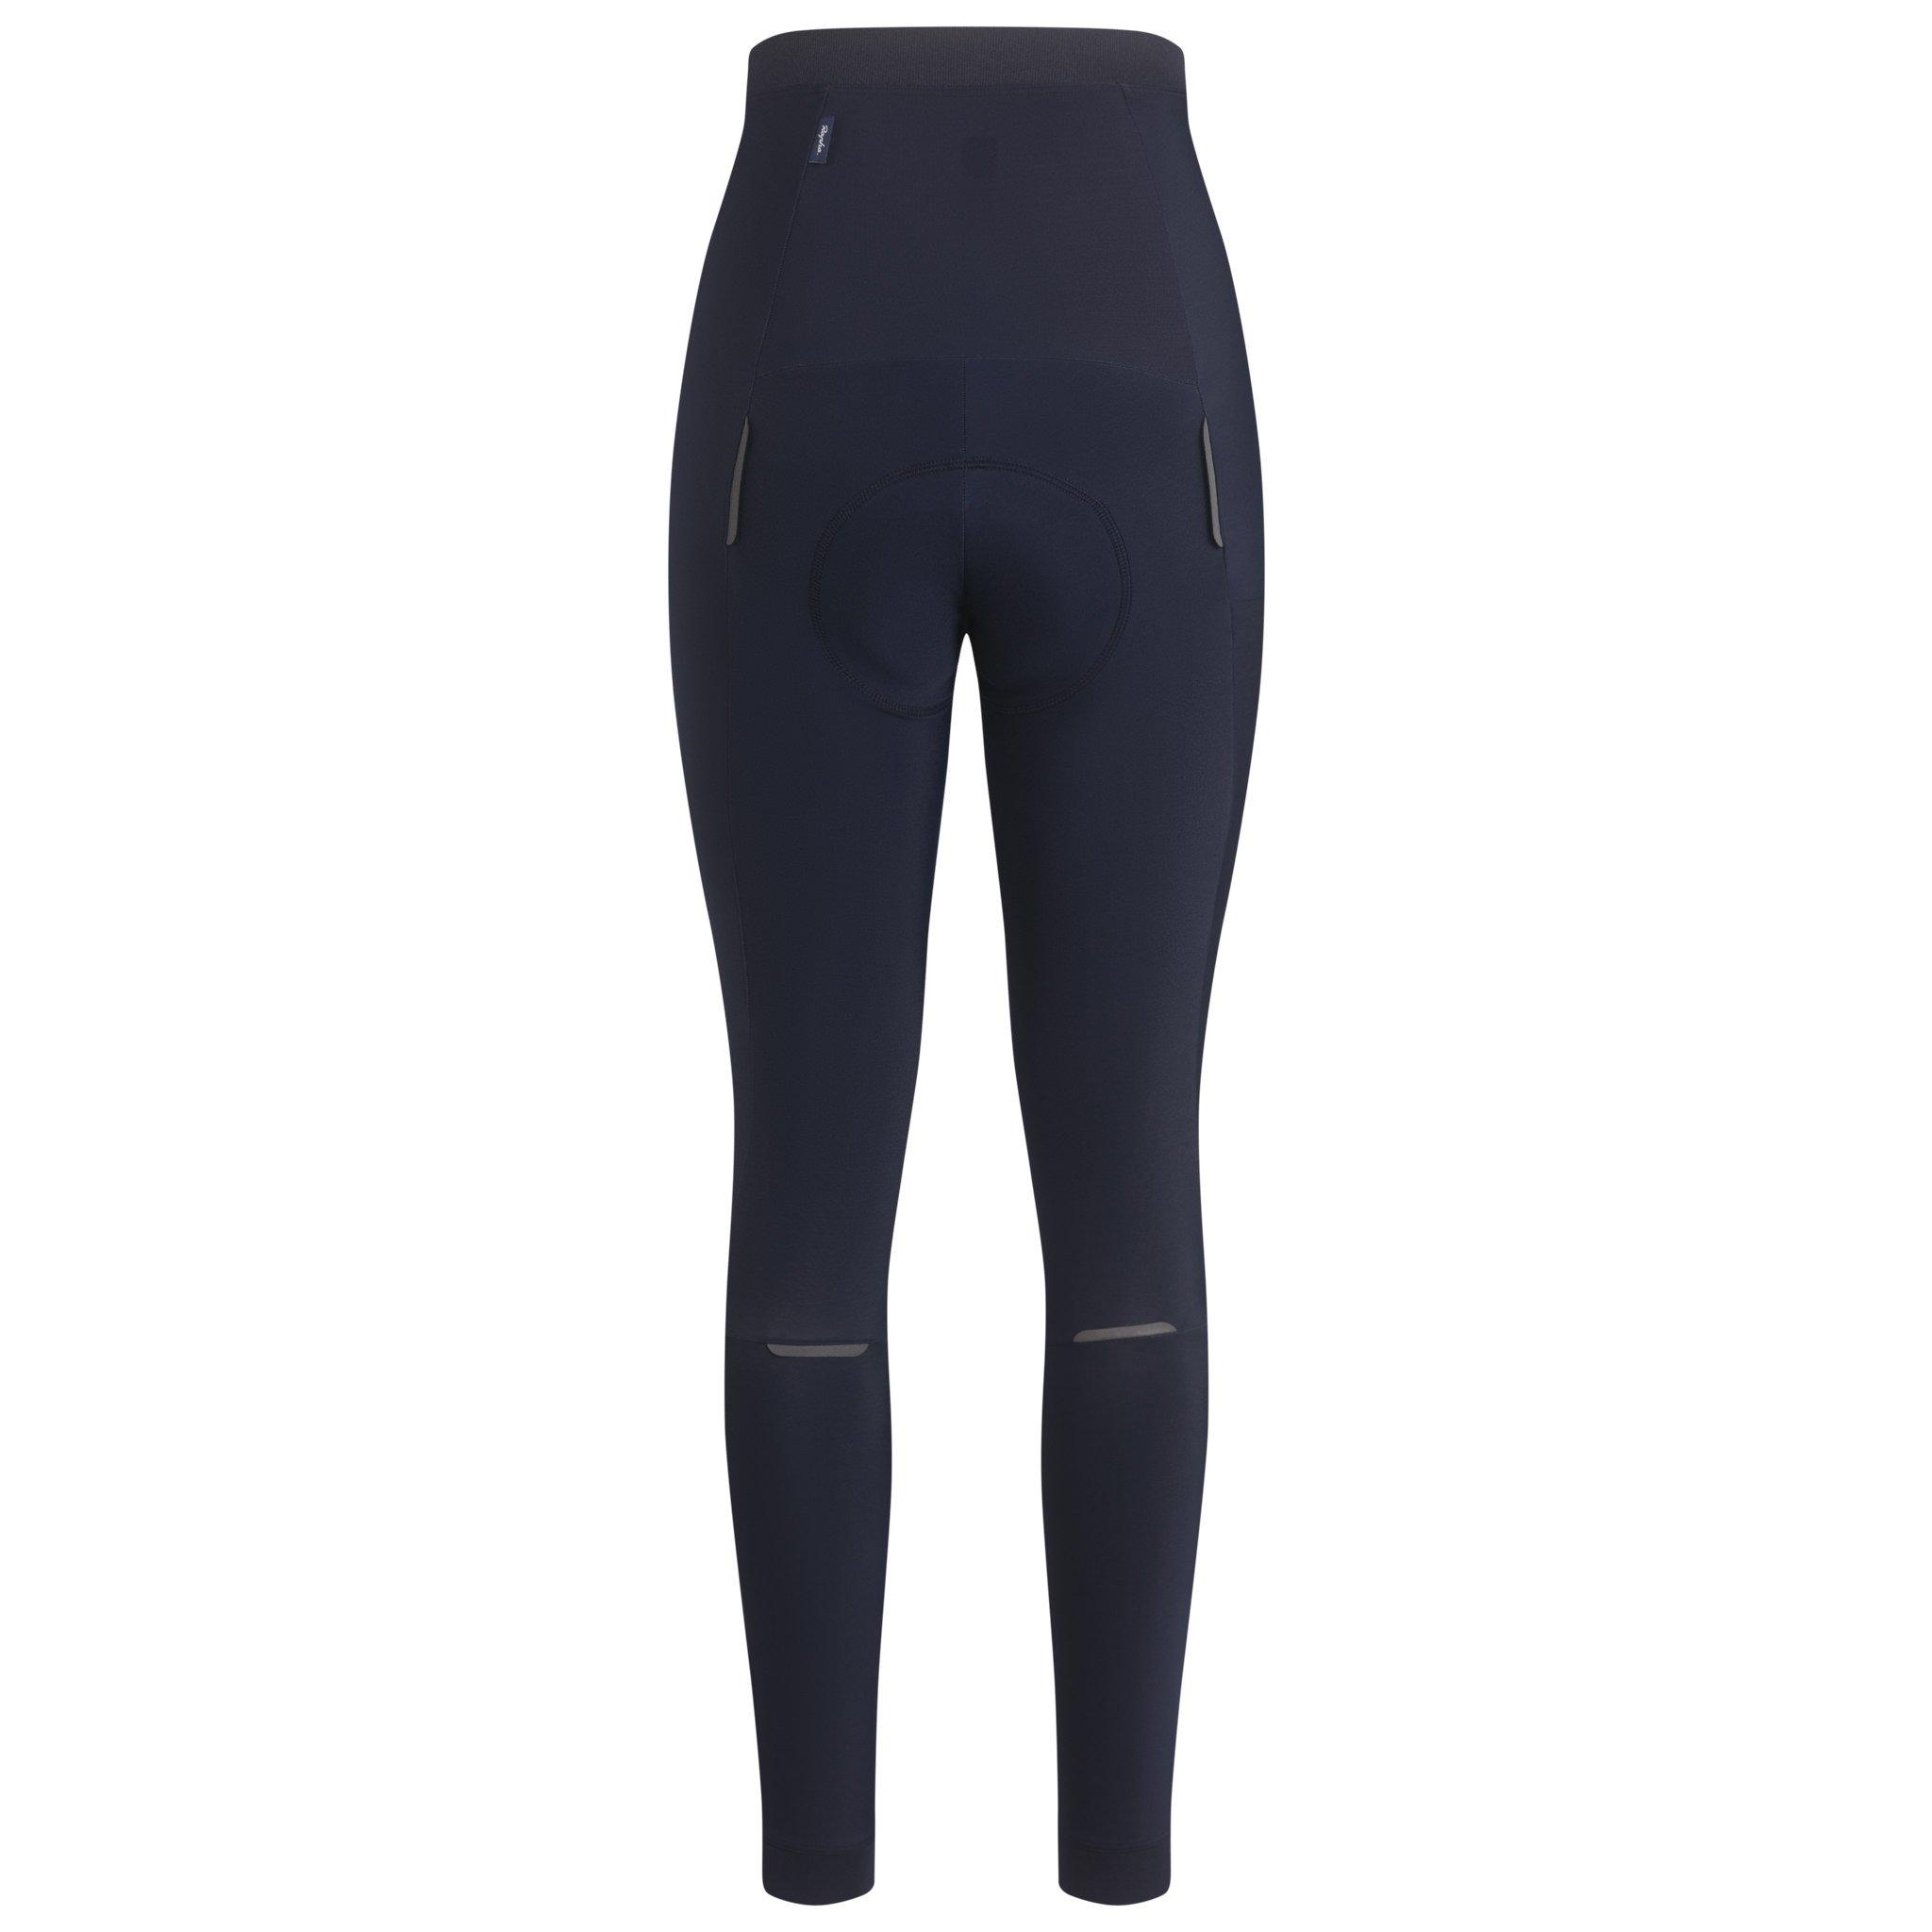 Buy NICEWIN Women Padded Cycling Tights with Pockets Long